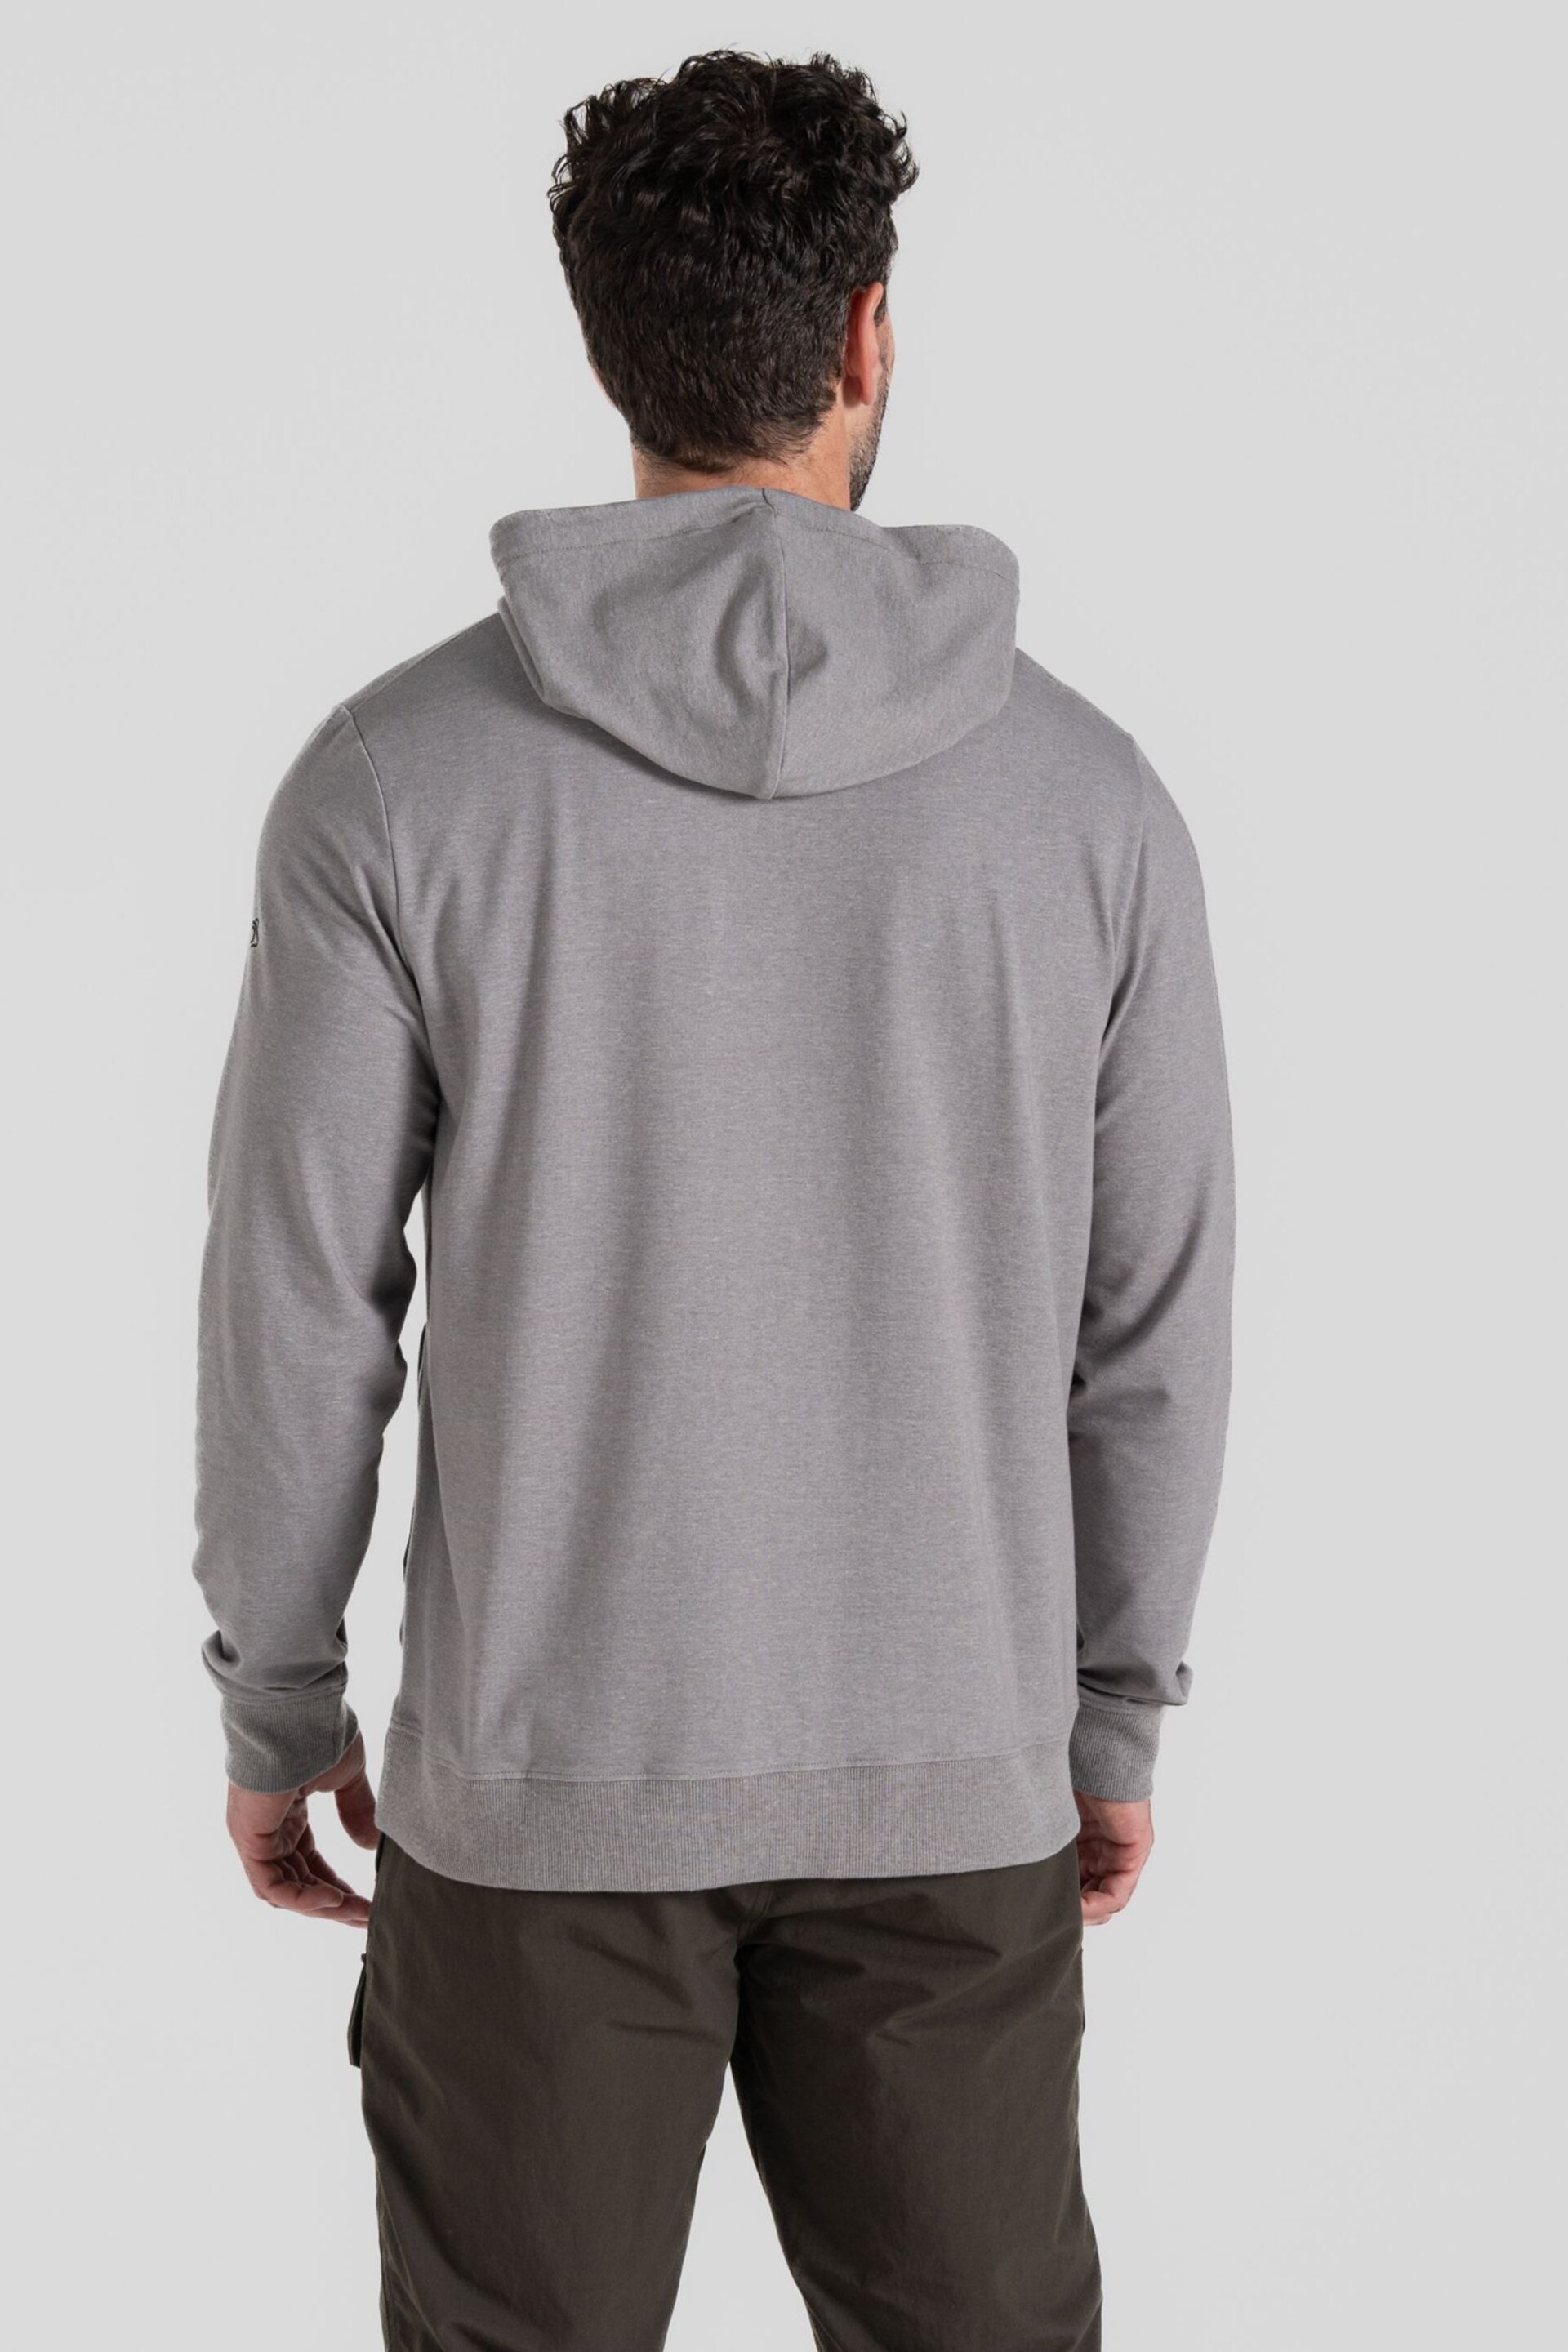 Craghoppers Grey NL Tagus Hooded Top - Image 2 of 7